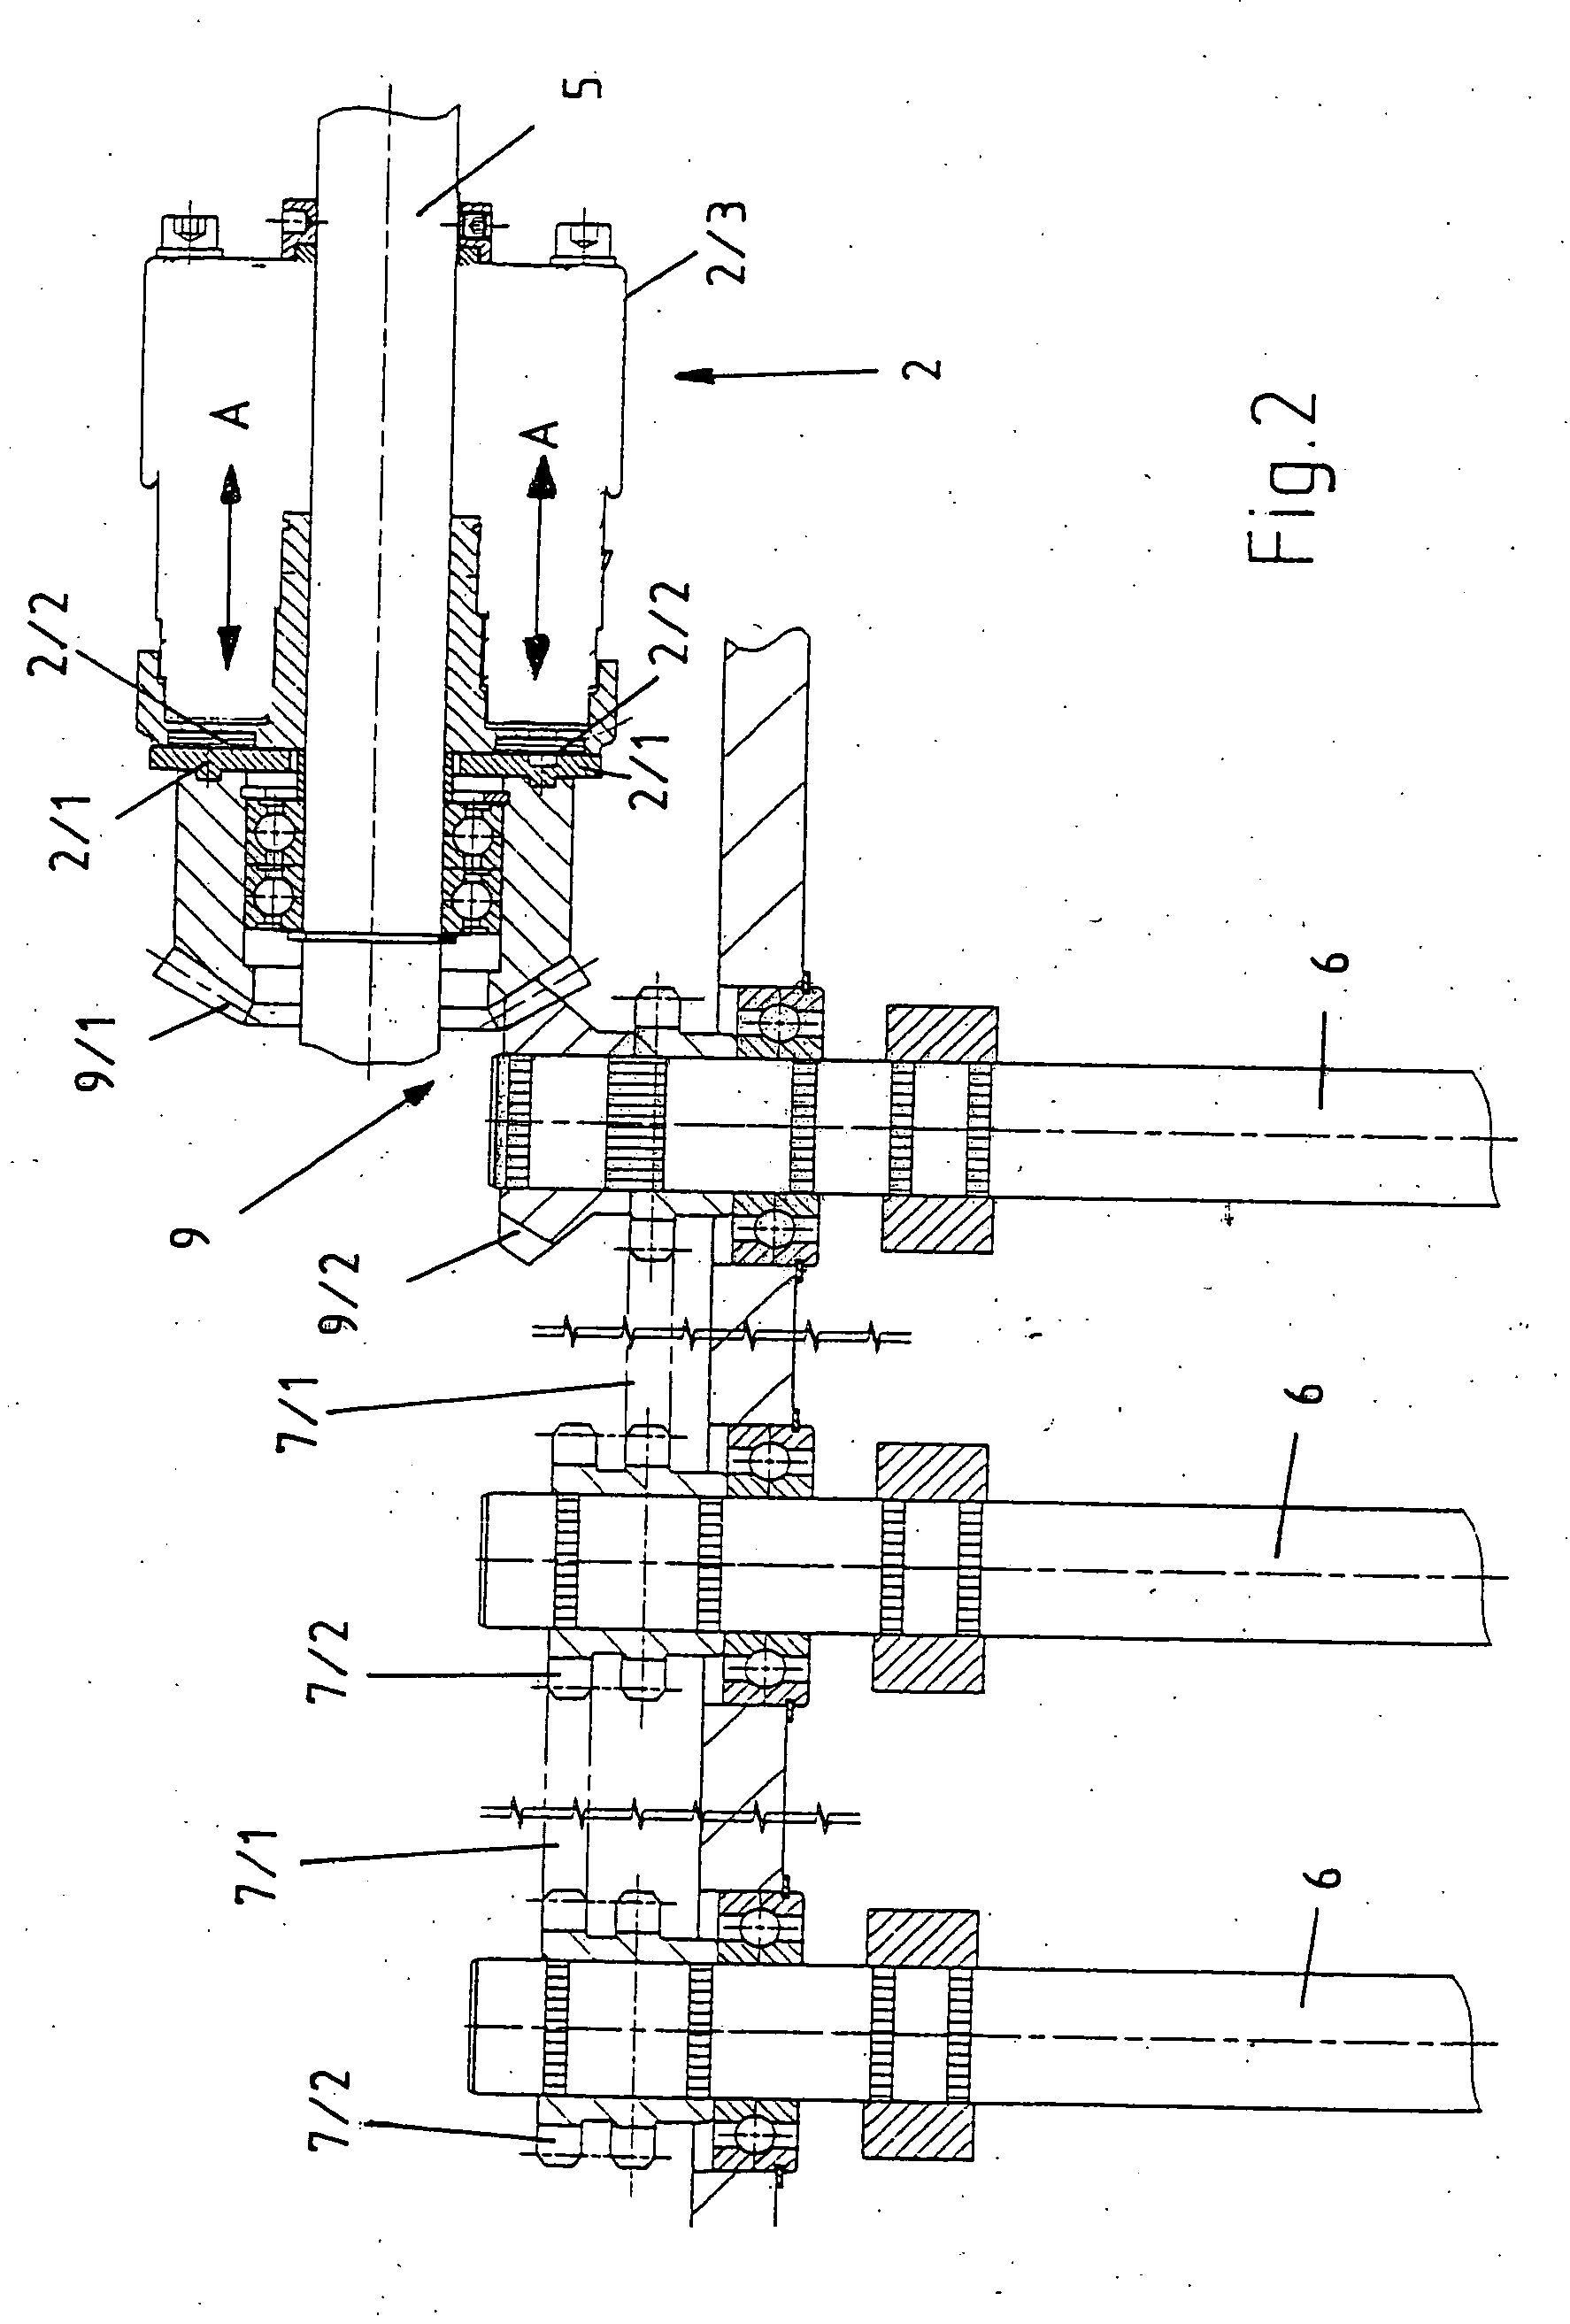 Conveying device for conveying workpieces